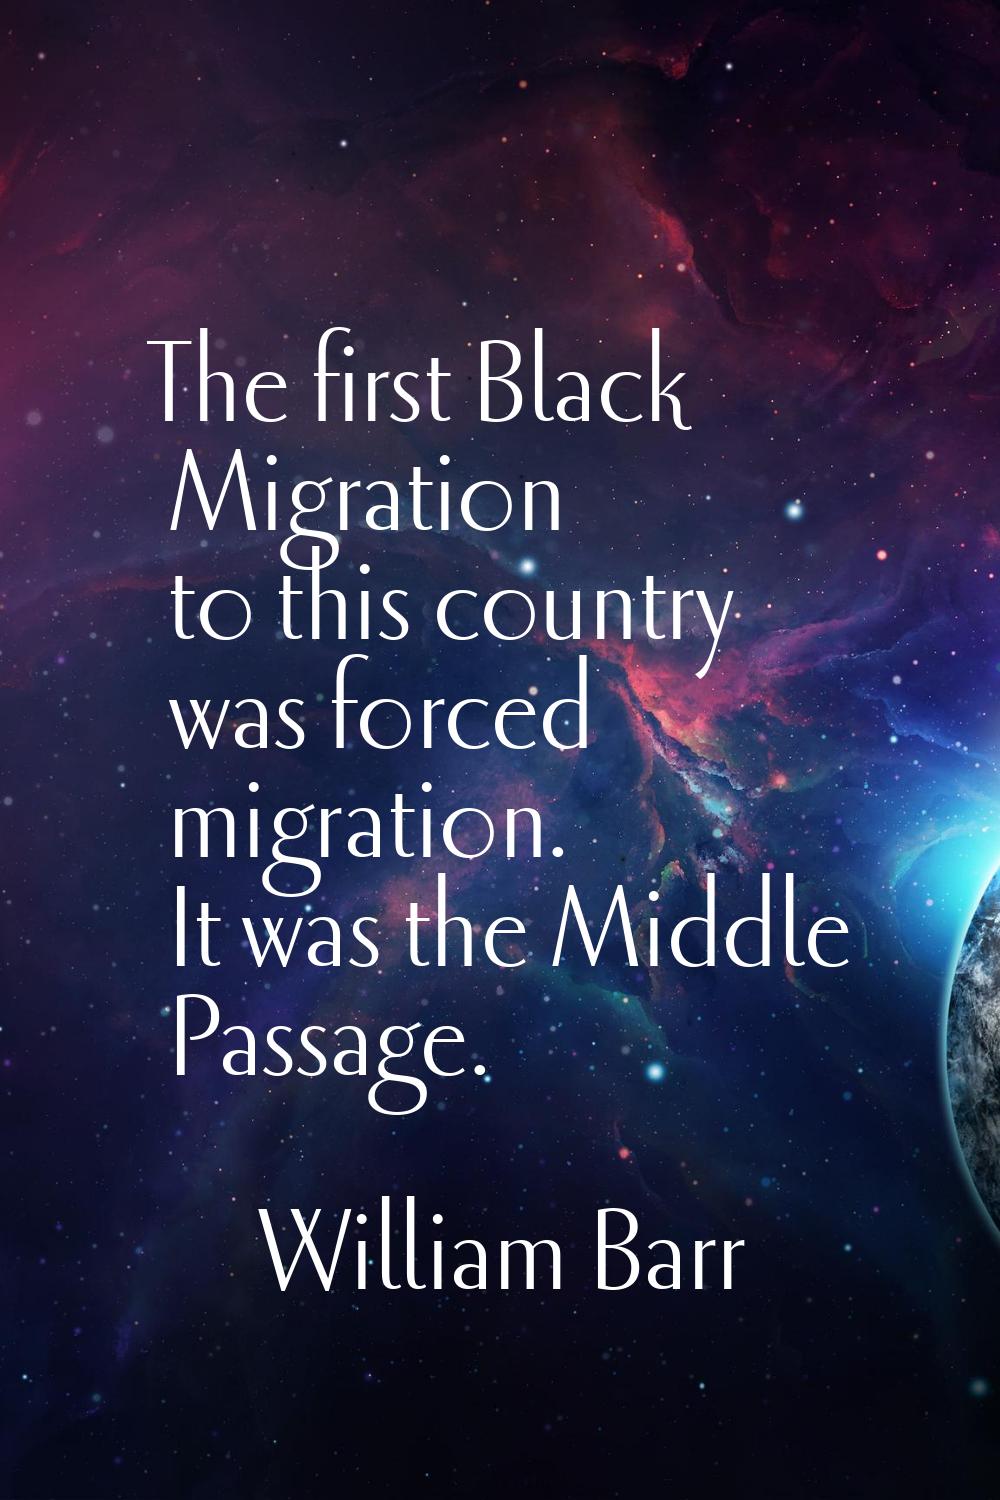 The first Black Migration to this country was forced migration. It was the Middle Passage.